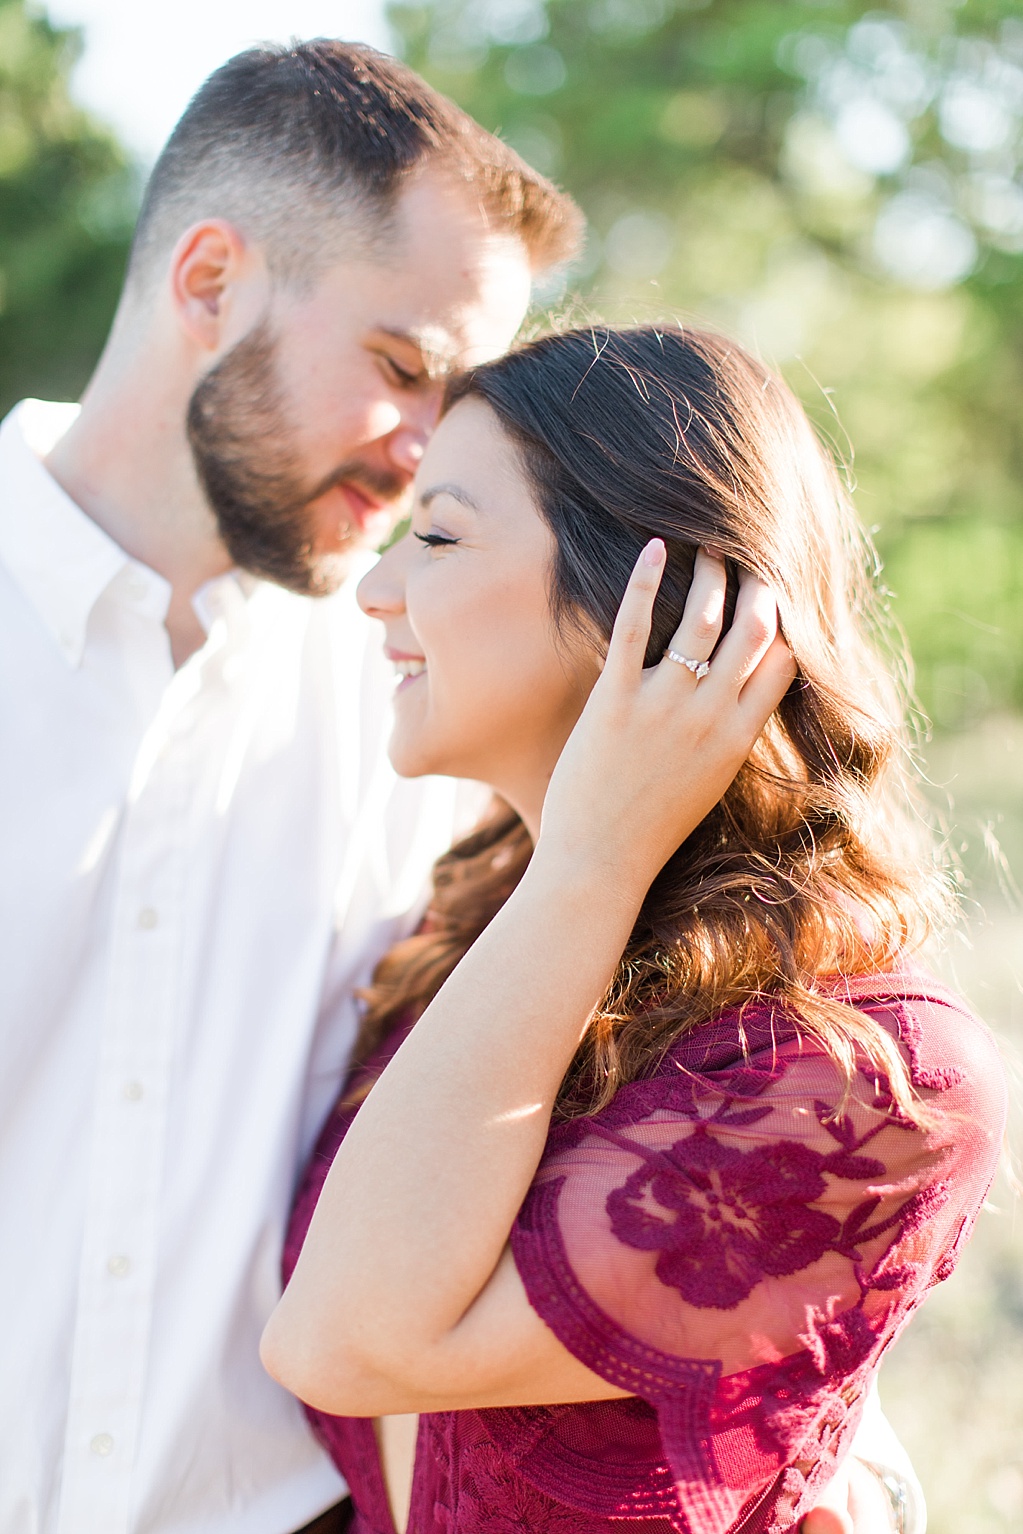 Eagle Dancer Ranch Engagement Photo Session in Boerne, Texas by Allison Jeffers Photography 0005